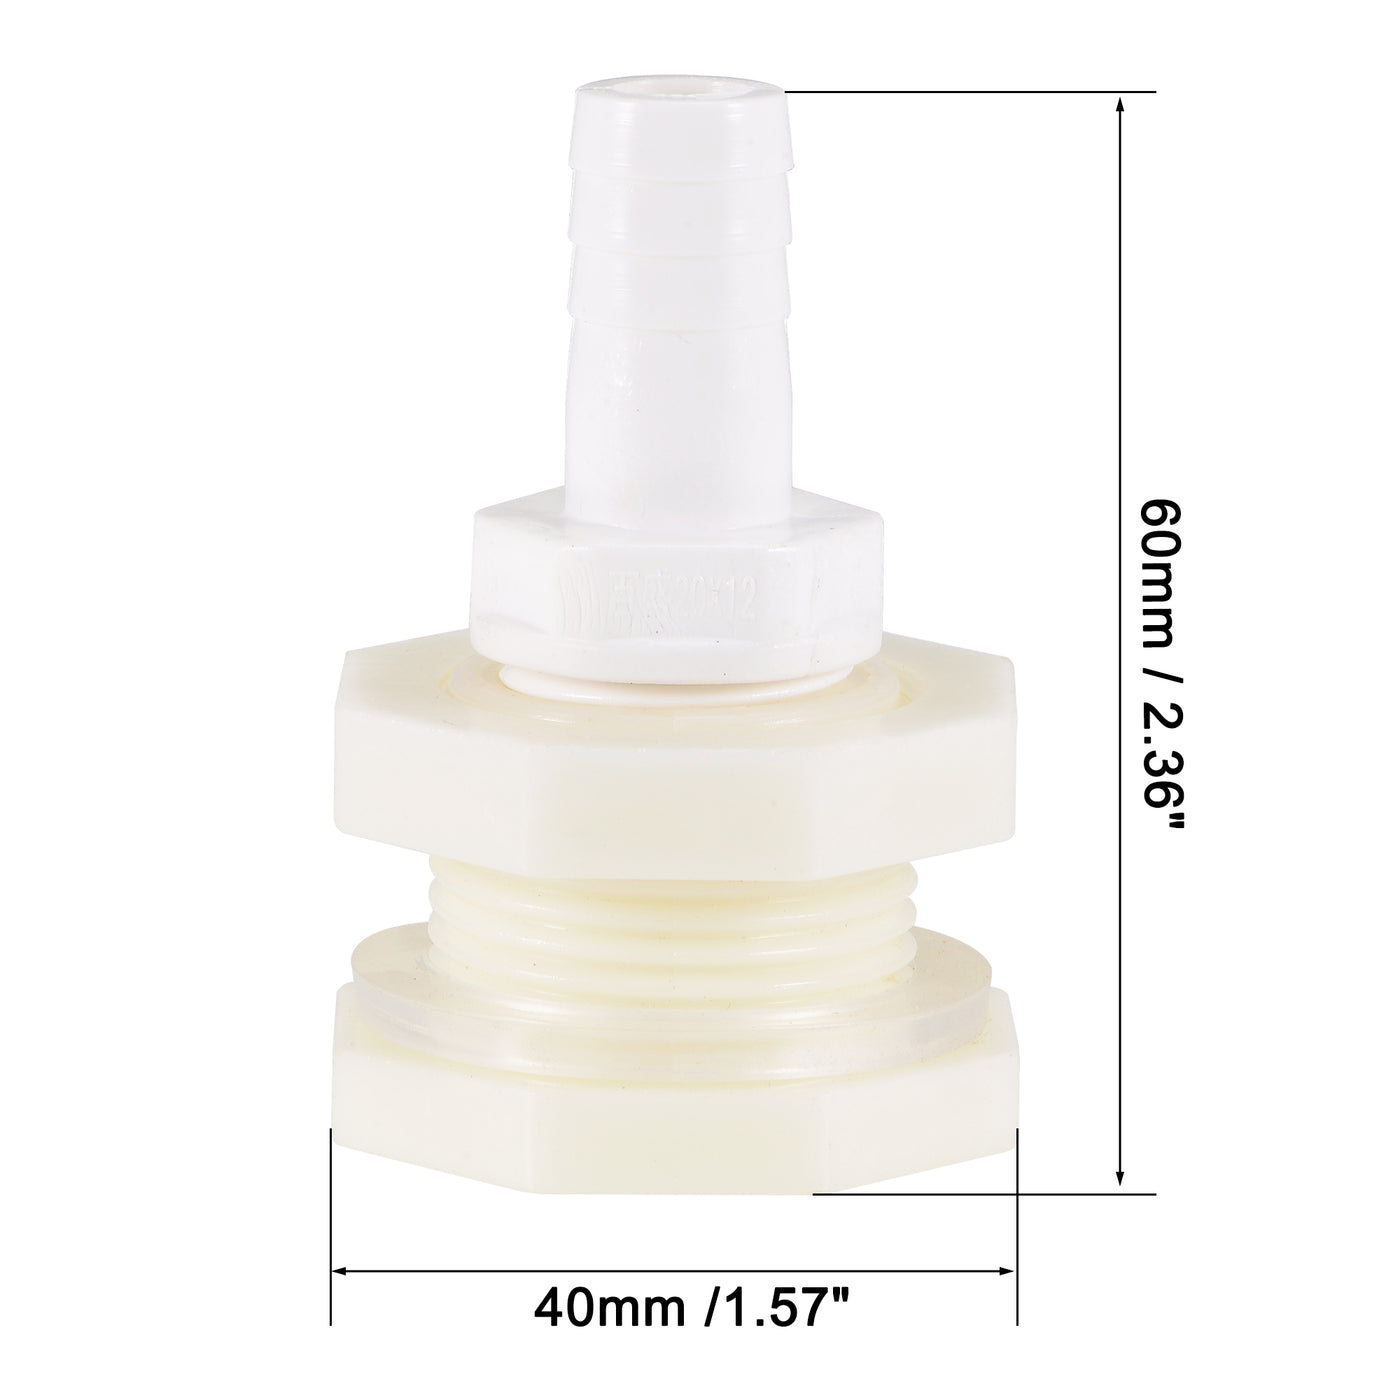 uxcell Uxcell Bulkhead Fitting Adapter 12mm Barbed x G1/2 Female ABS White for Aquariums, Water Tanks, Tubs, Pools 4Pcs